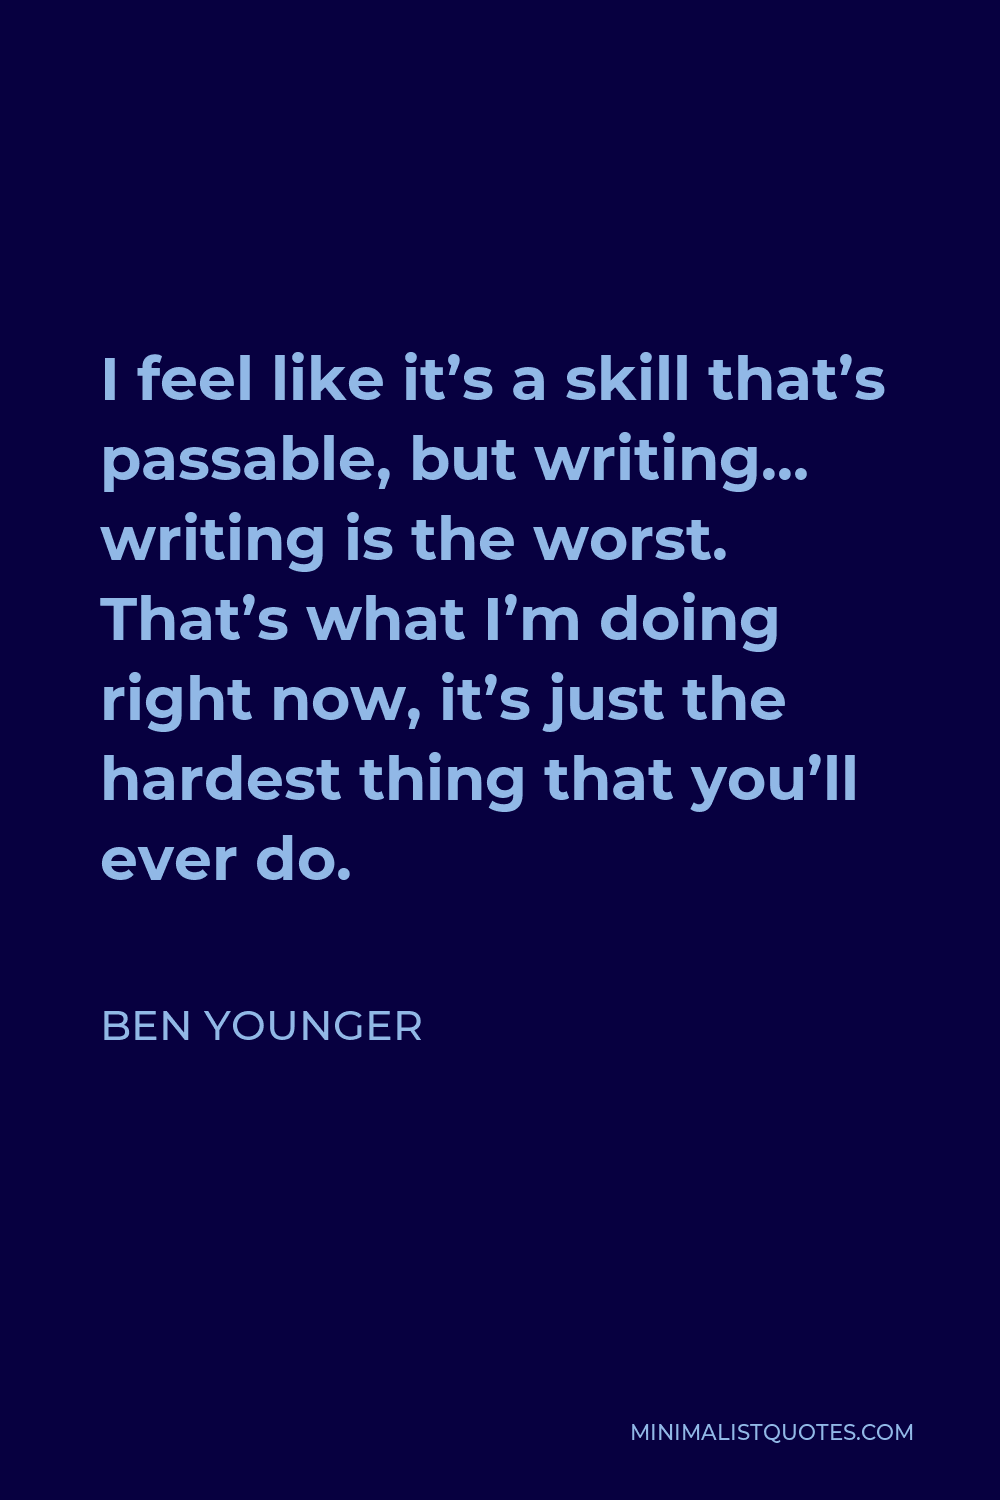 Ben Younger Quote - I feel like it’s a skill that’s passable, but writing… writing is the worst. That’s what I’m doing right now, it’s just the hardest thing that you’ll ever do.